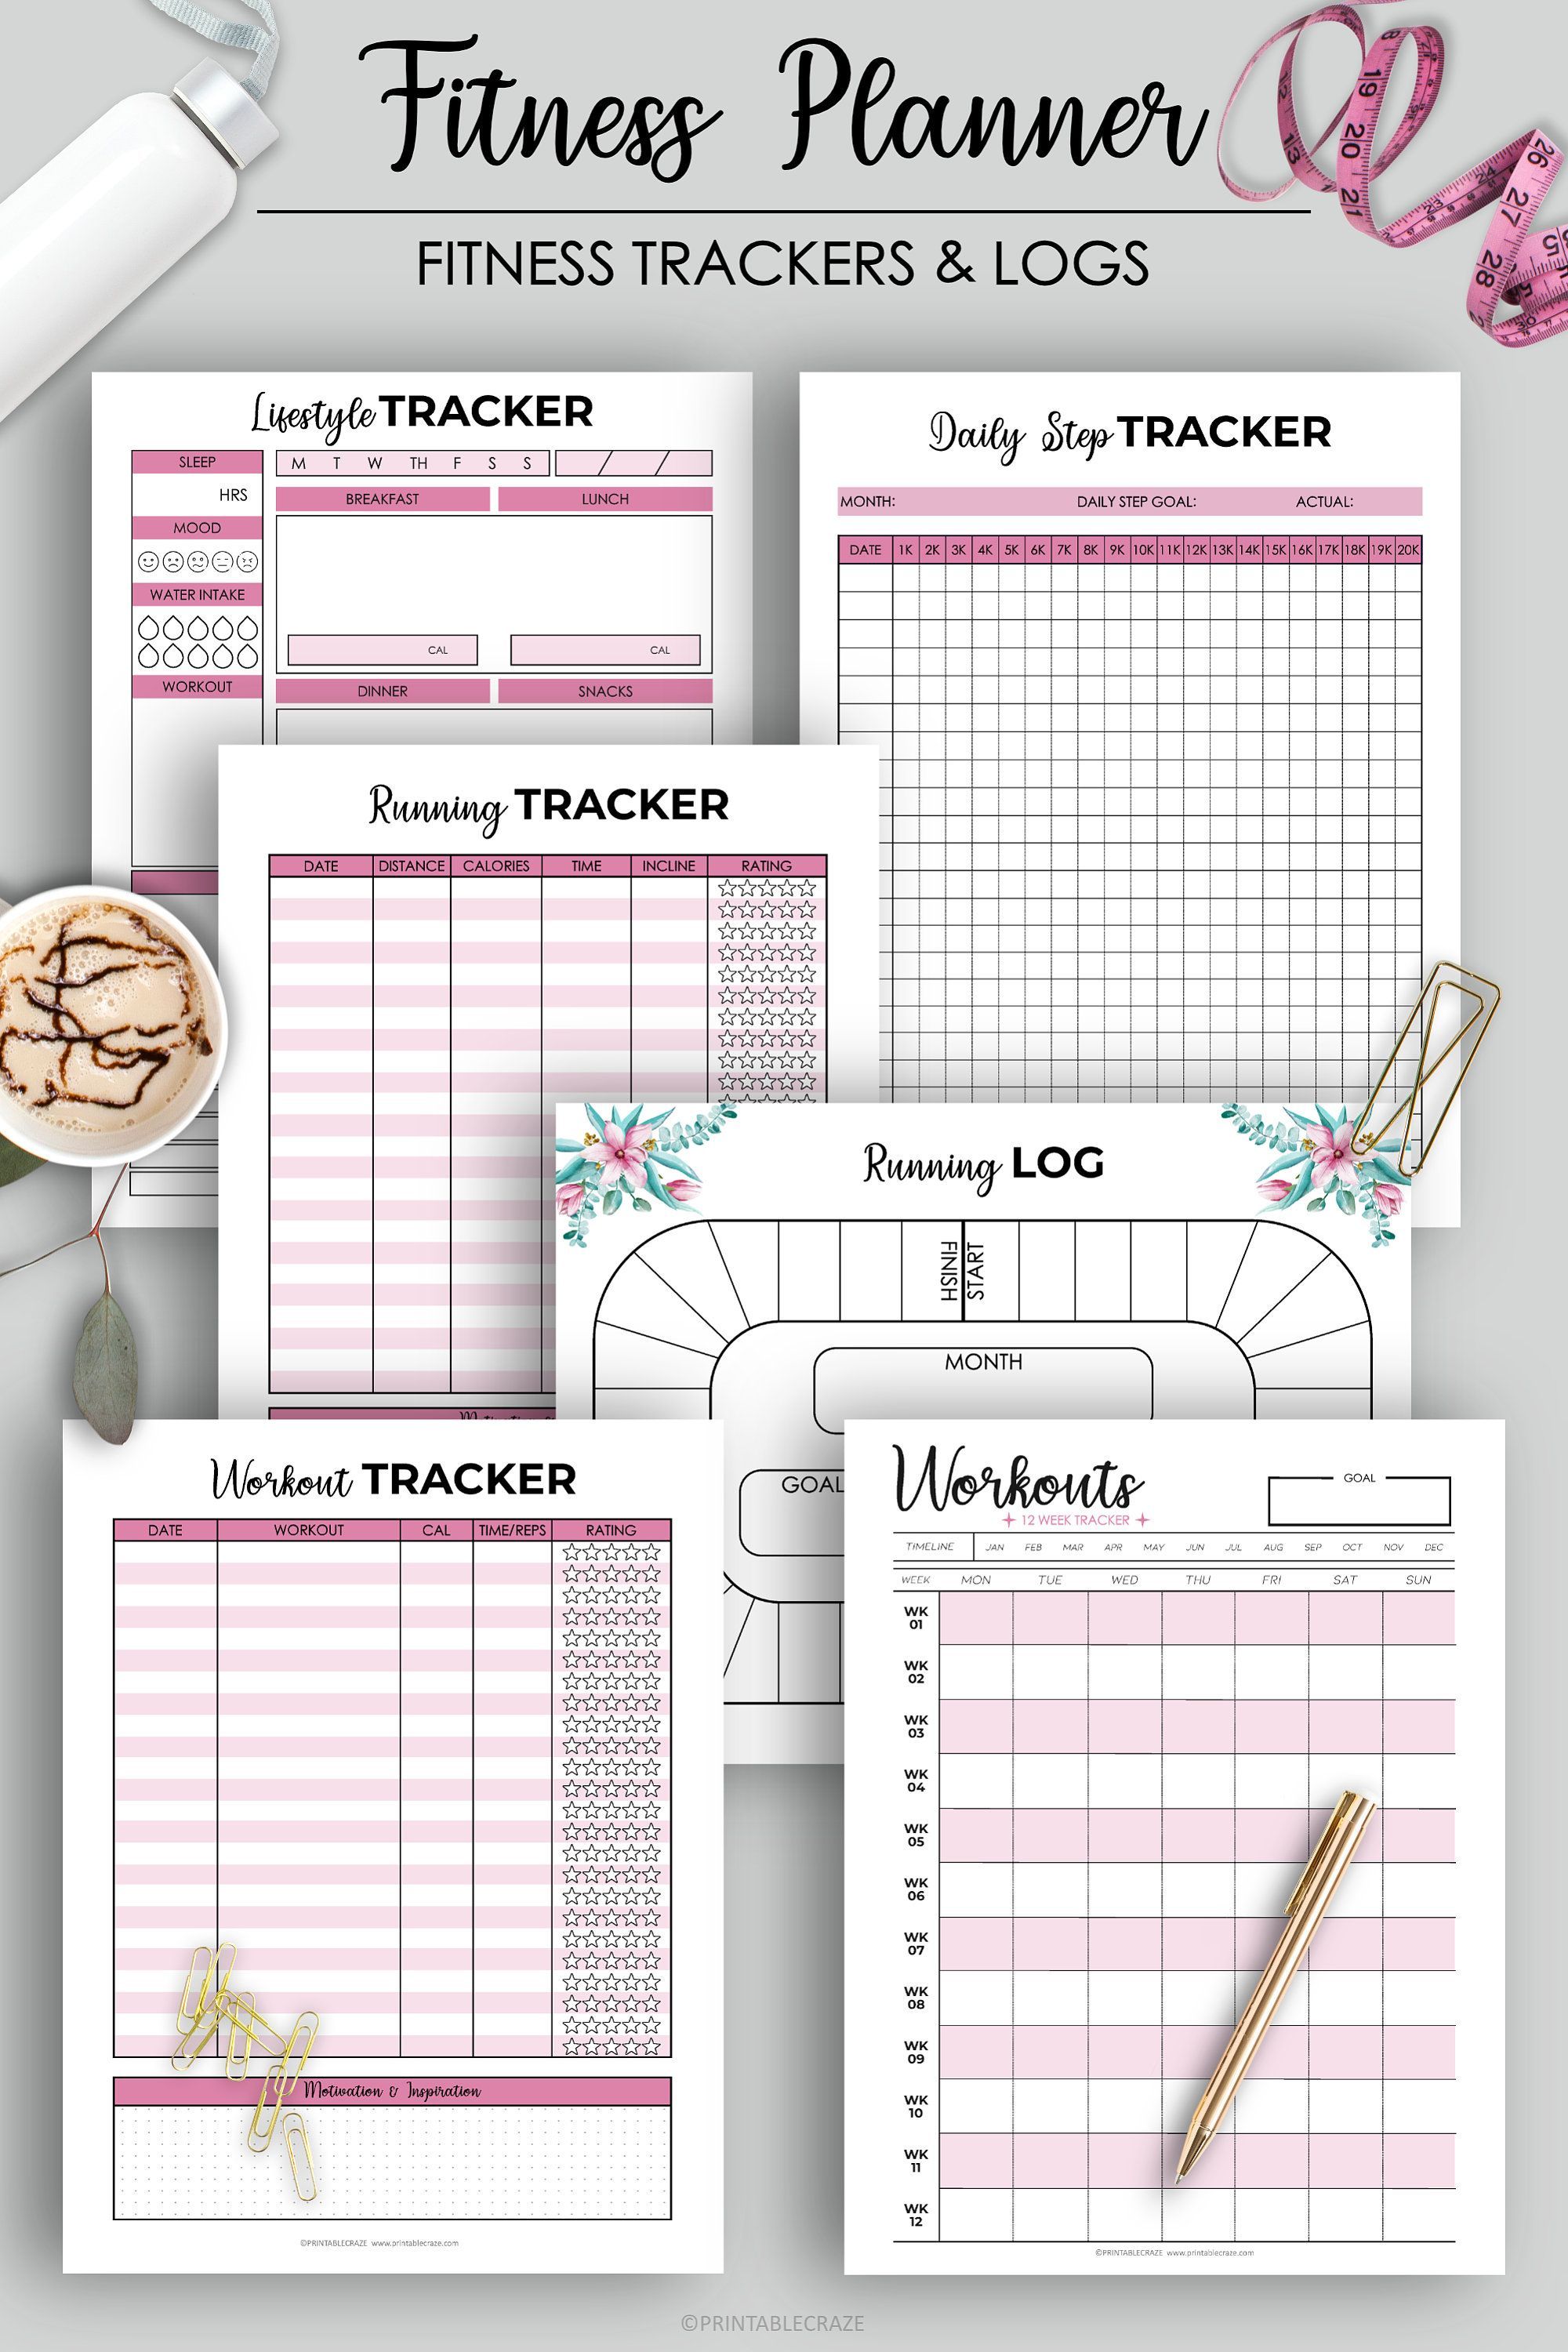 Fitness Planner Printable Weight Loss Health Planner Fitness | Etsy - Fitness Planner Printable Weight Loss Health Planner Fitness | Etsy -   14 fitness Planner 2019 ideas